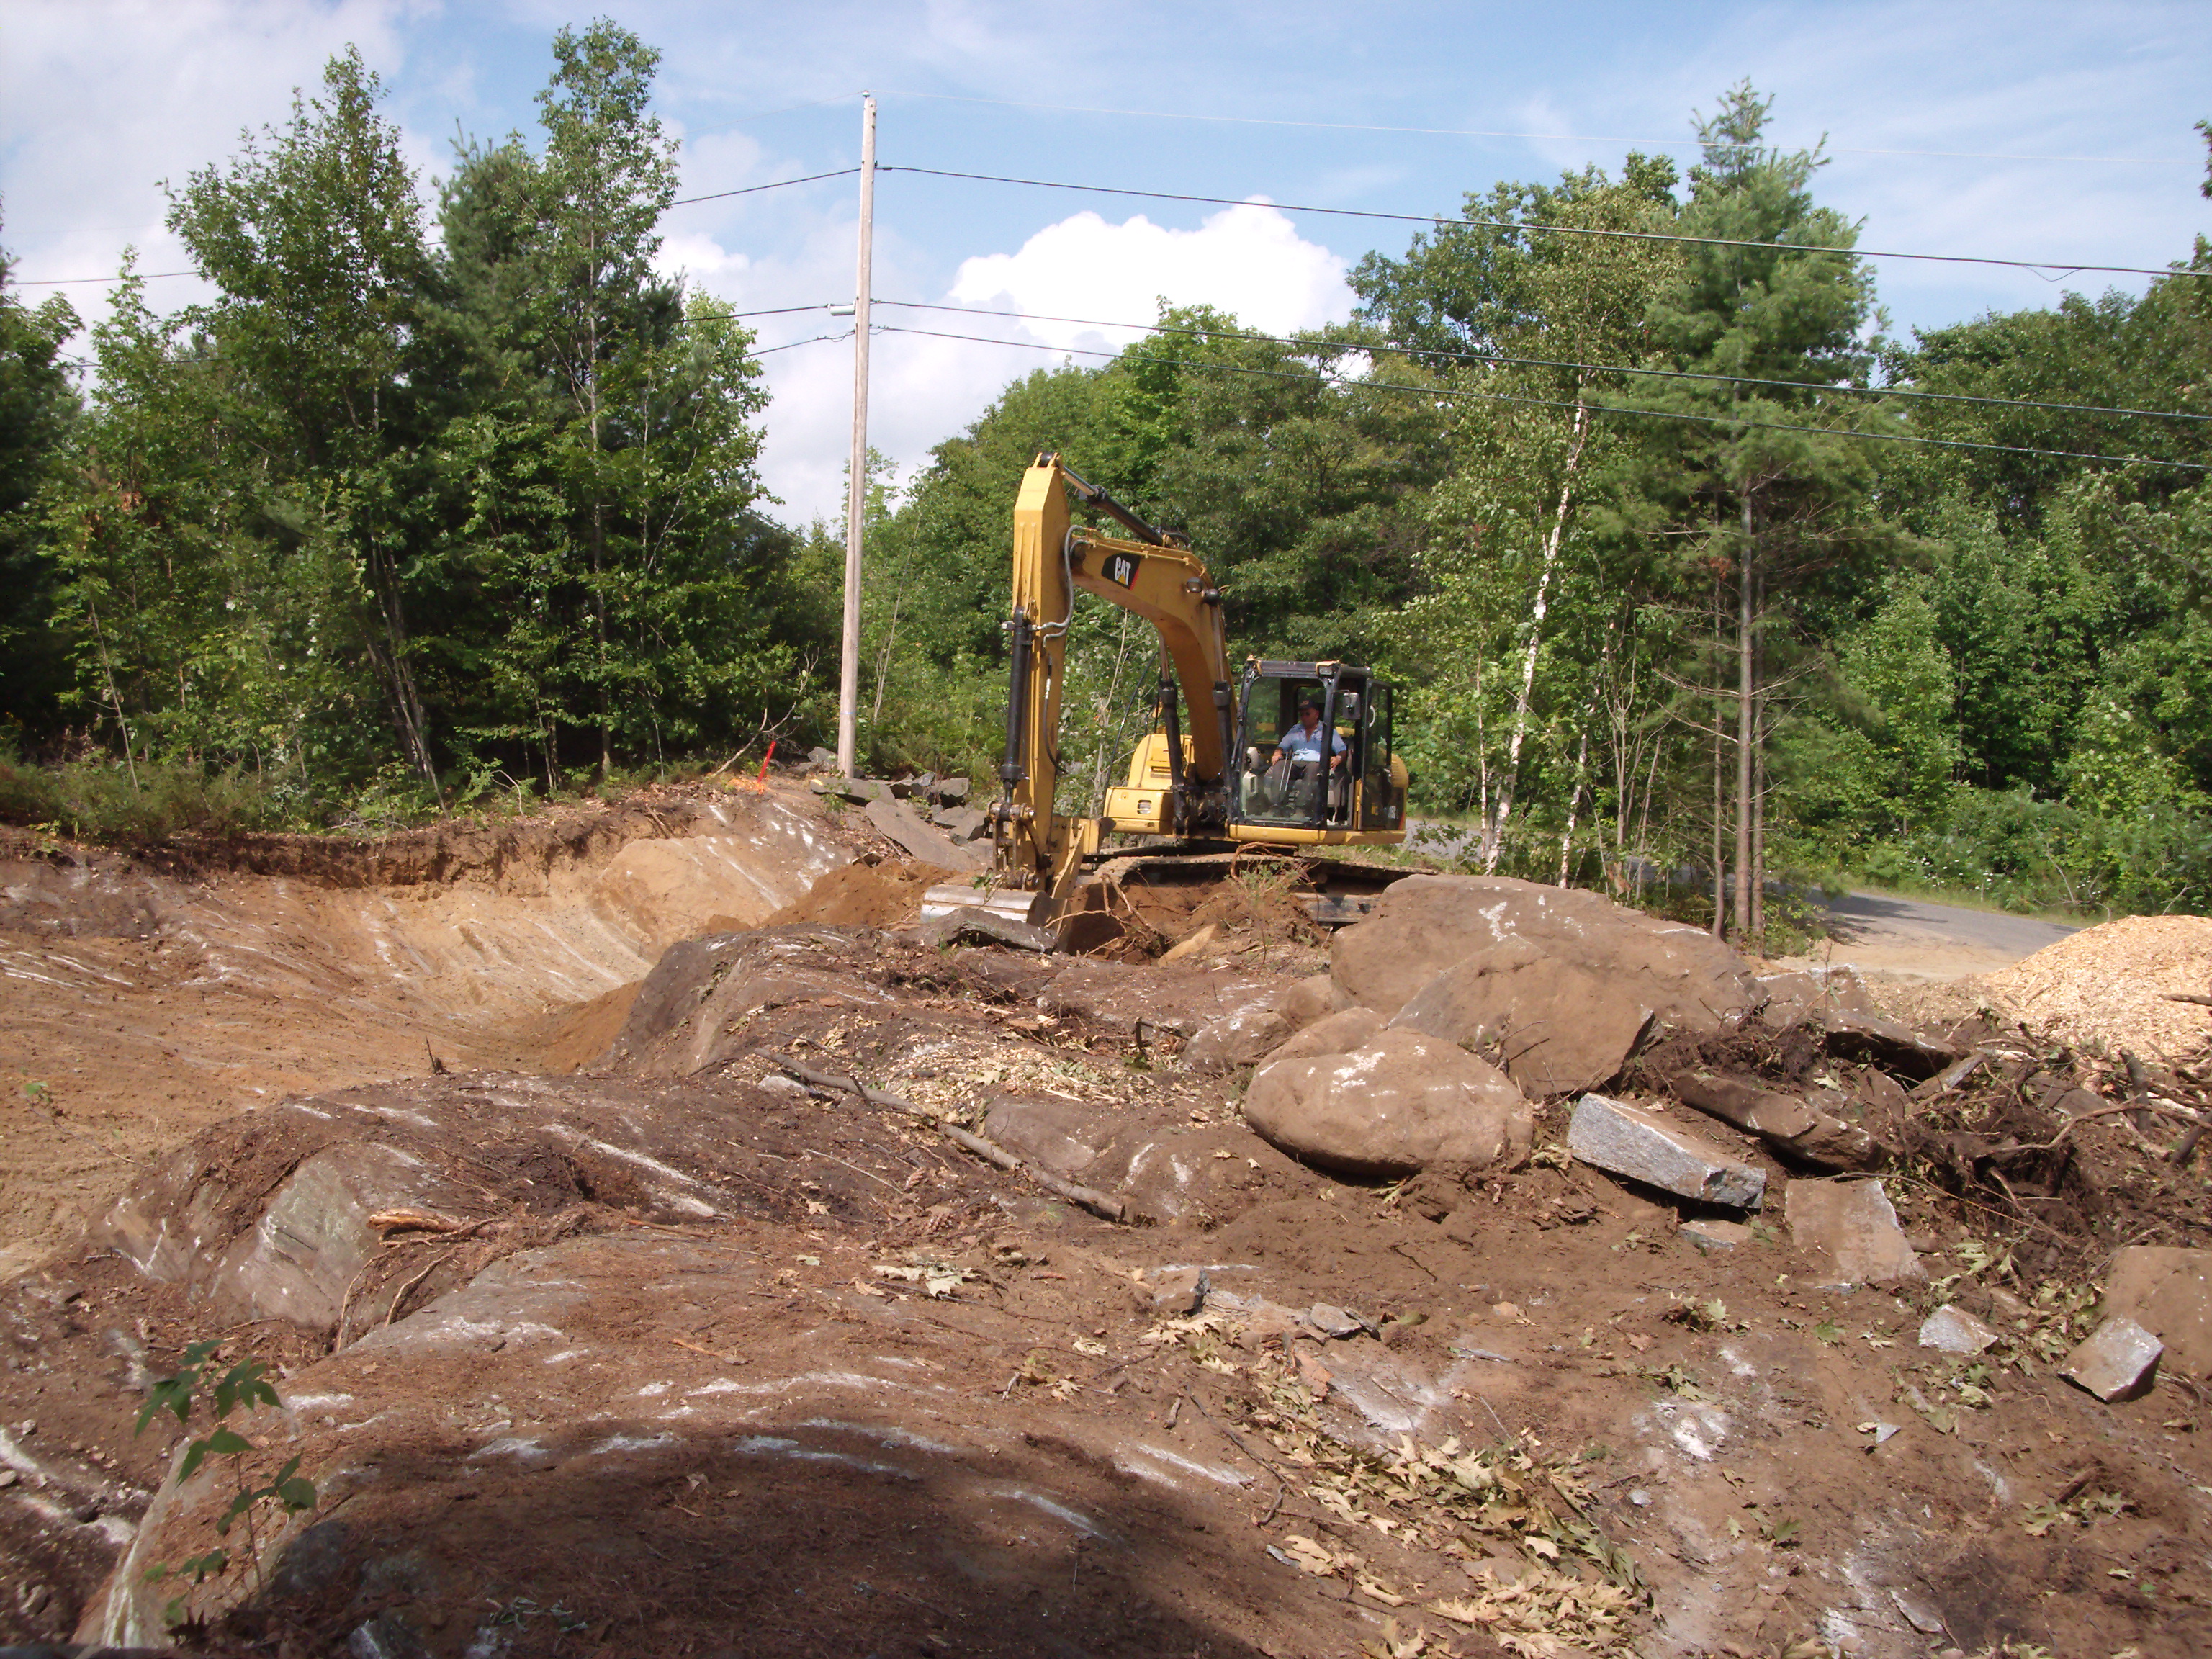 Site soil removed to shallow bedrock